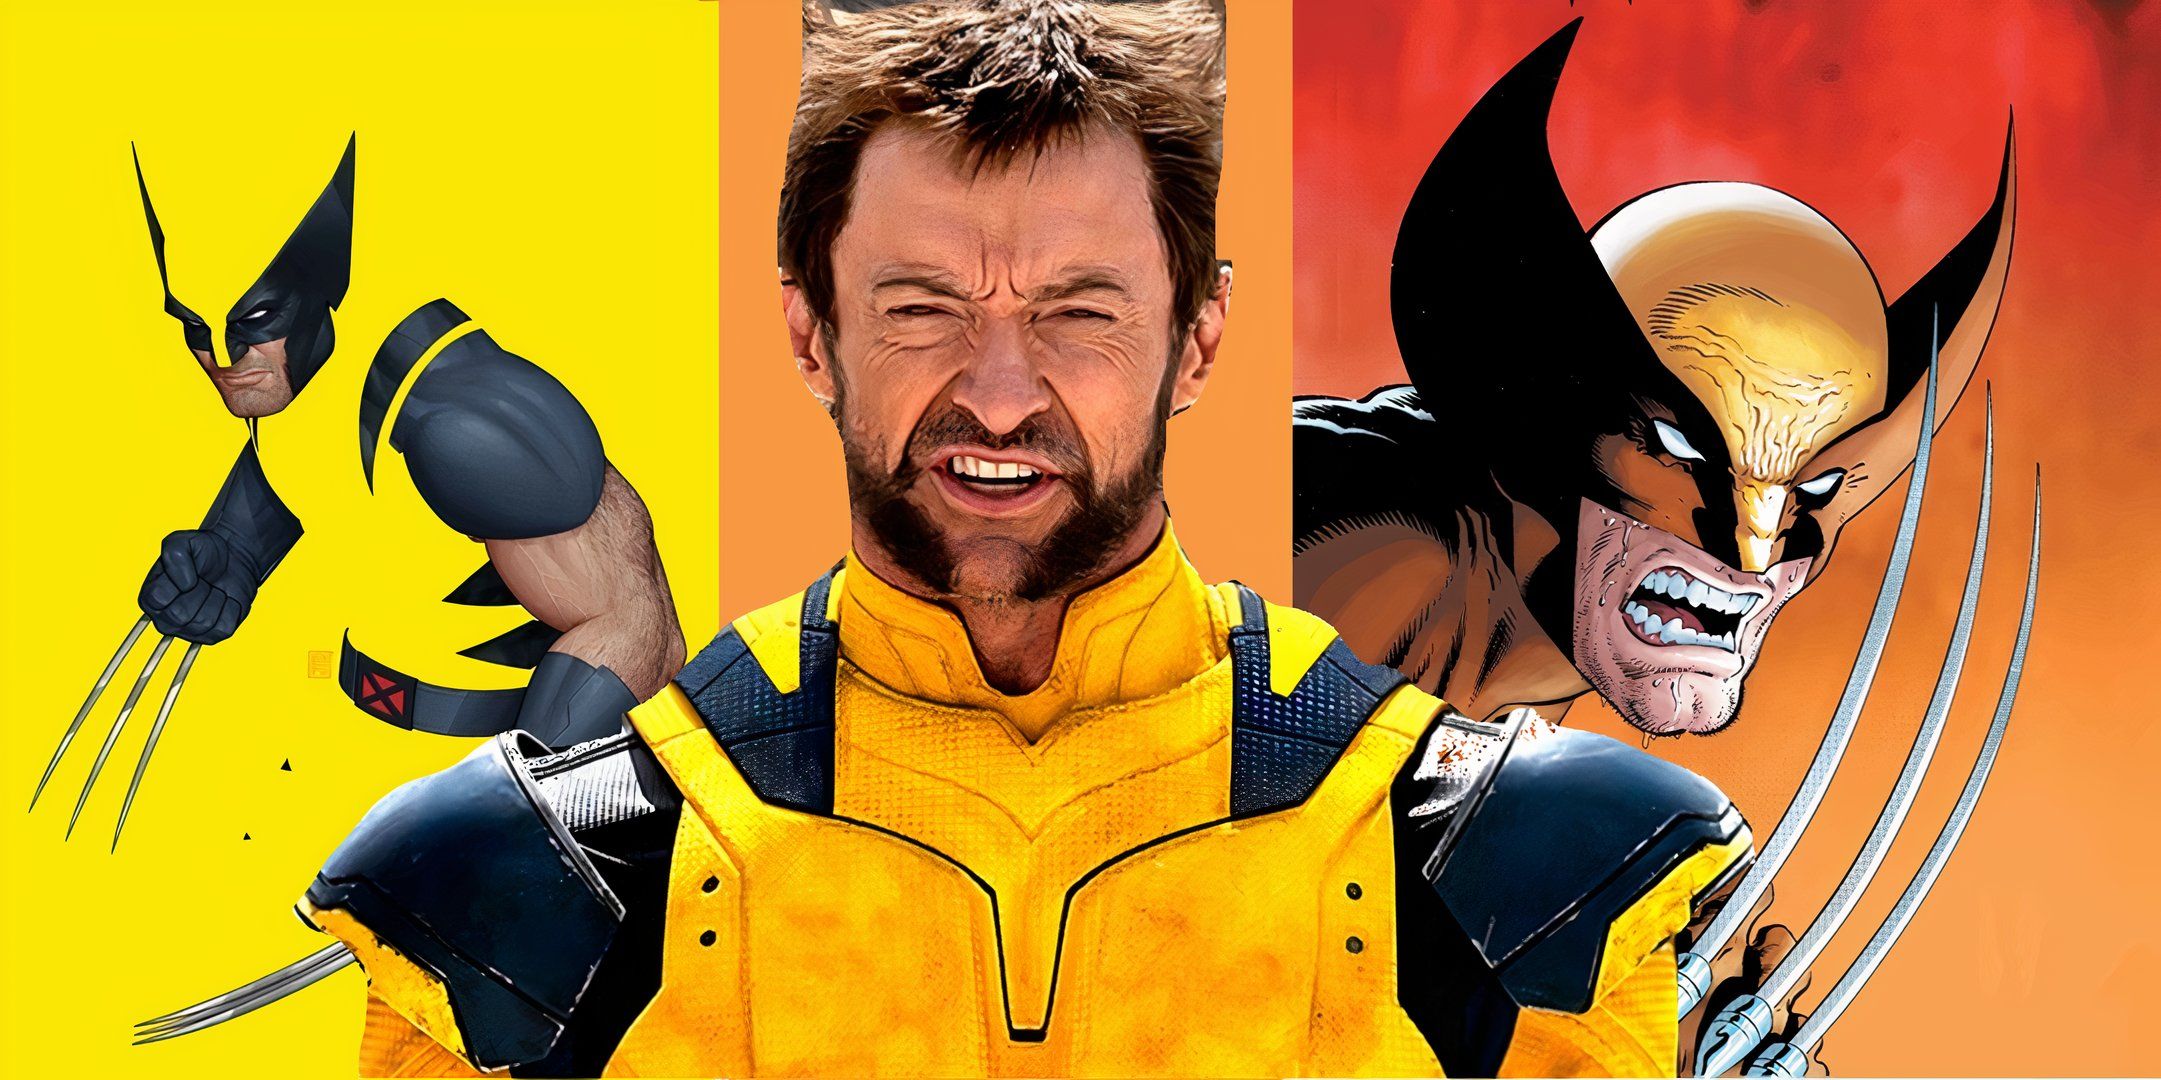 Hugh Jackman's Wolverine ahead of two Wolverine variant covers